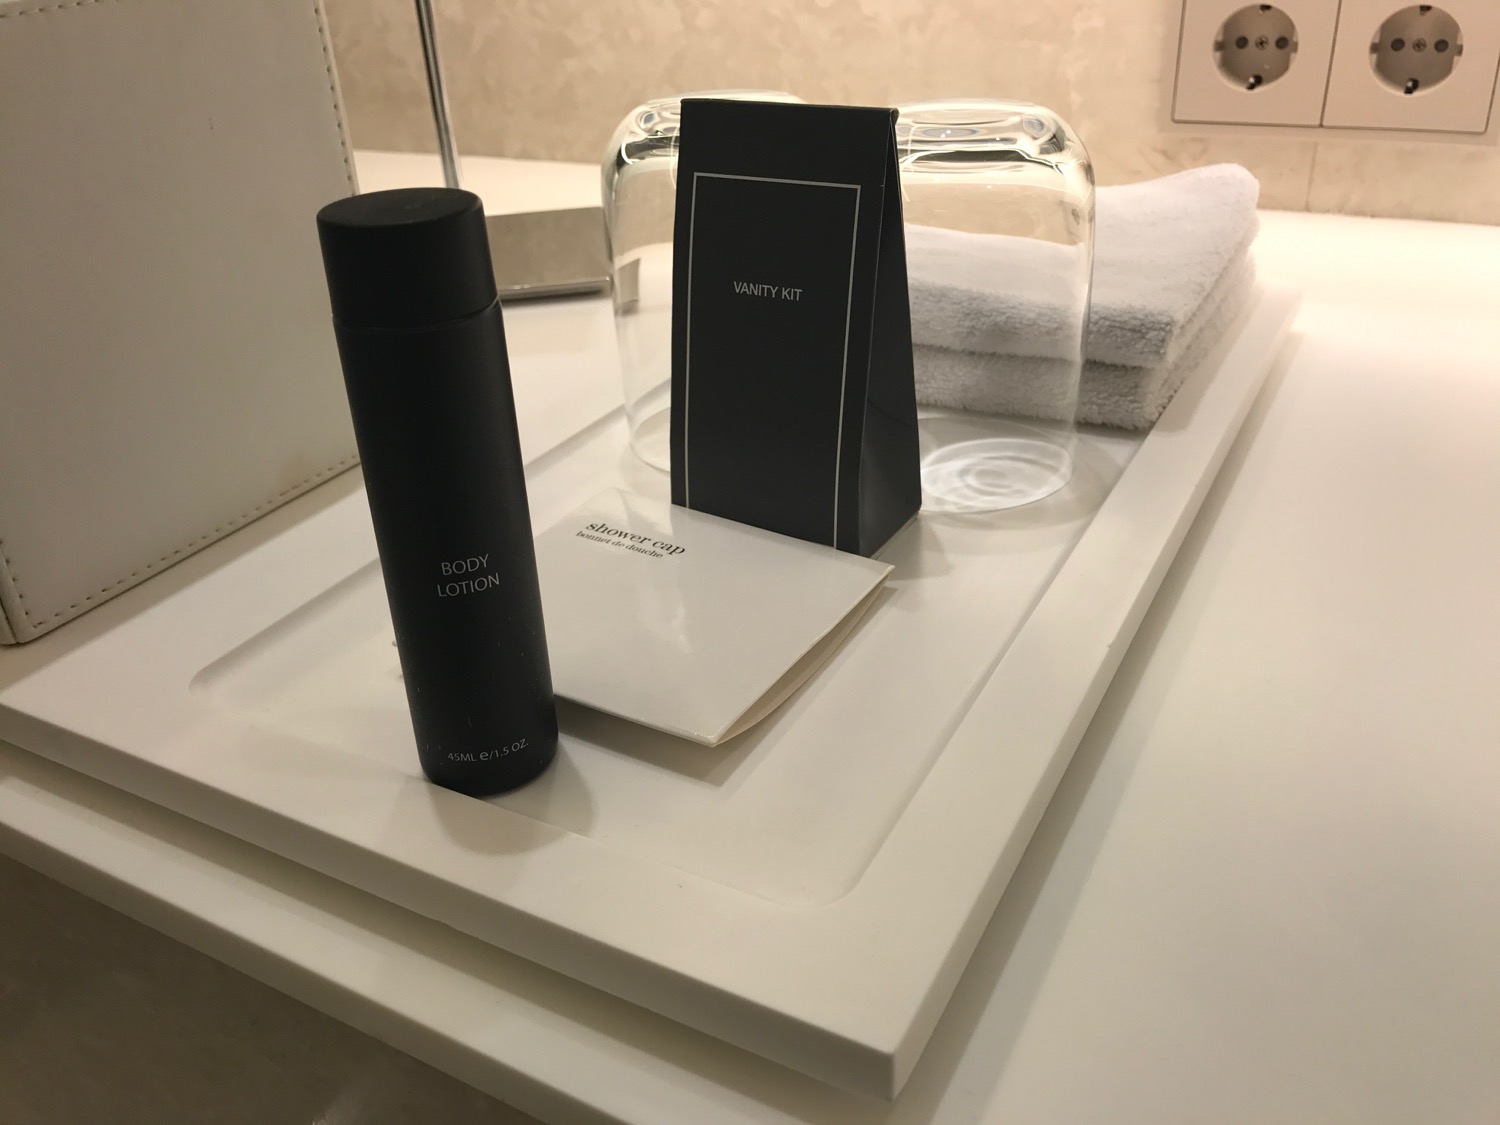 Hyat Centric Levent Istanbul Review - 13